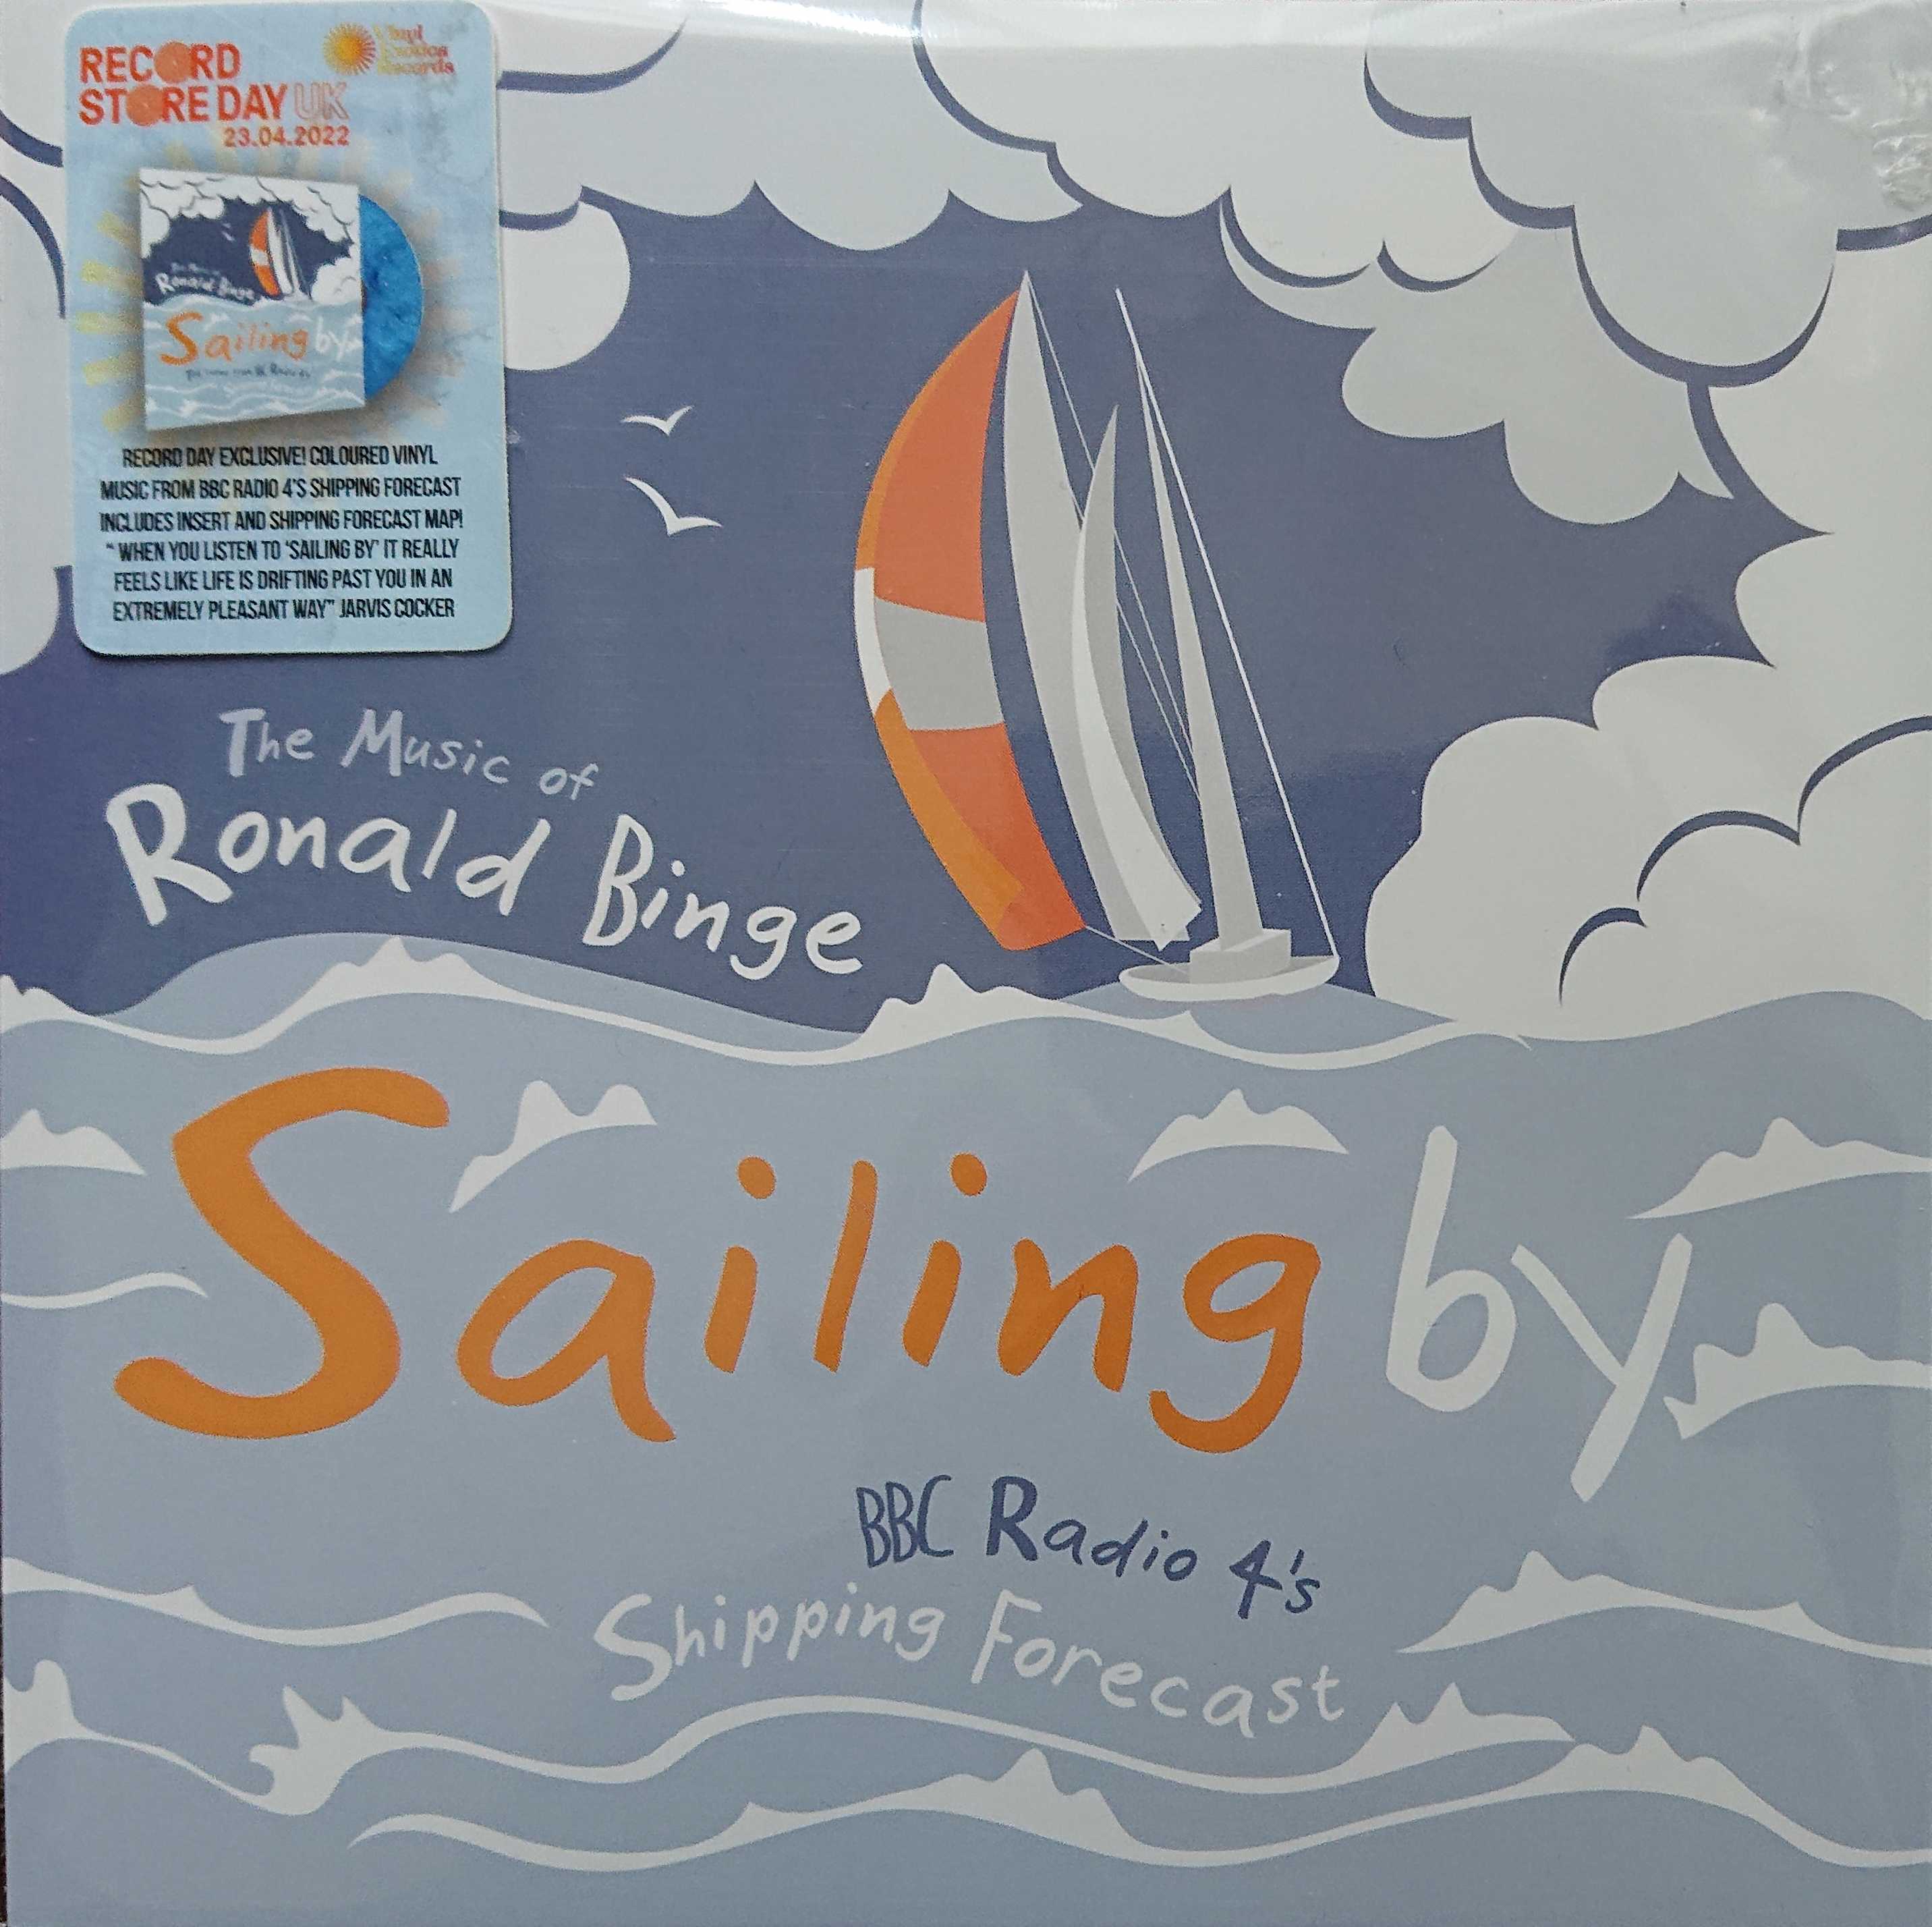 Picture of 141095 208537 Sailing by (BBC Radio 4's shipping forecast) - Record Store Day 2022 by artist Ronald Binge from the BBC records and Tapes library